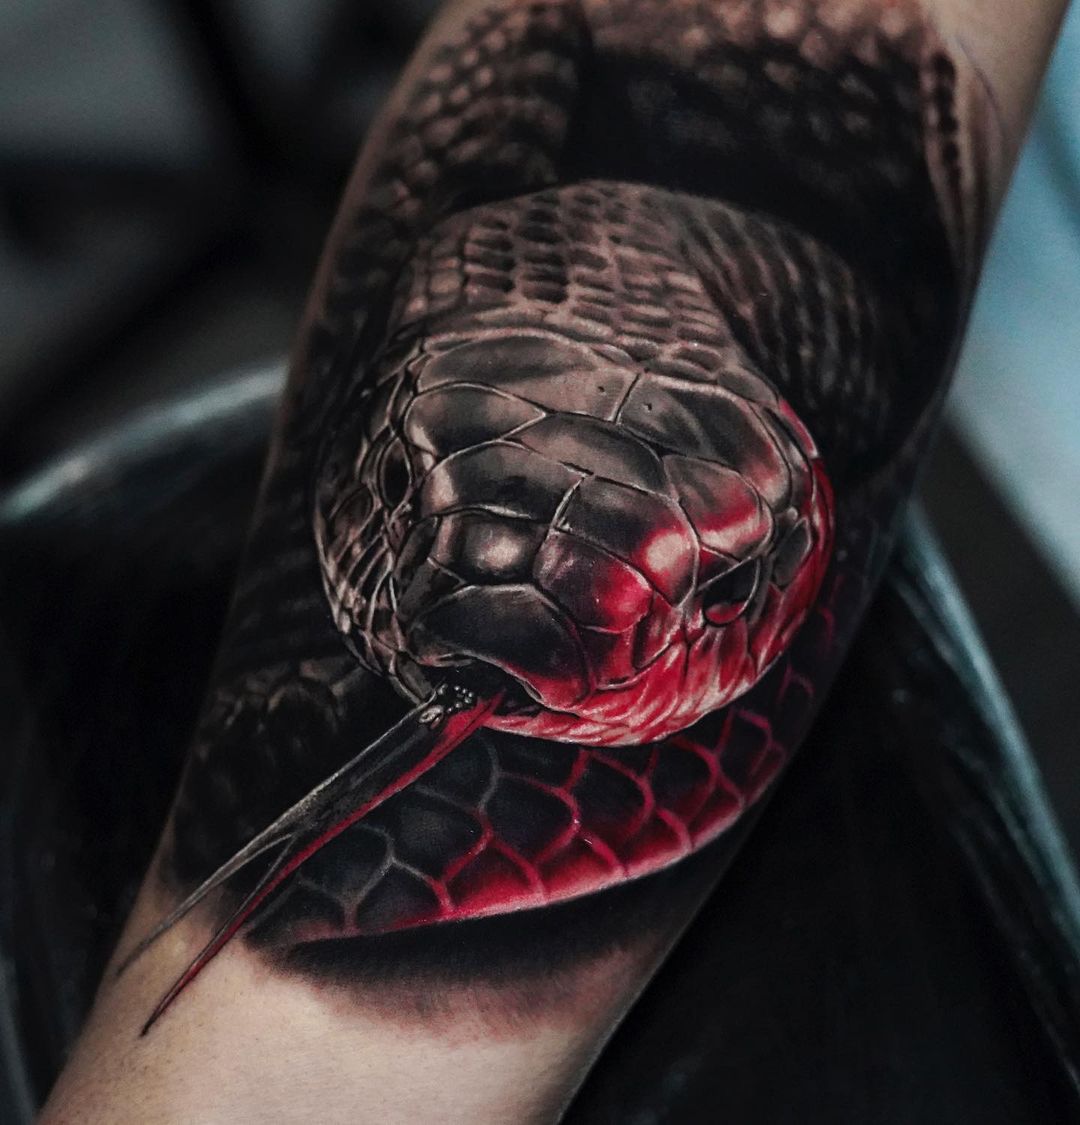 Snake Tattoo 1 – Out of Kit